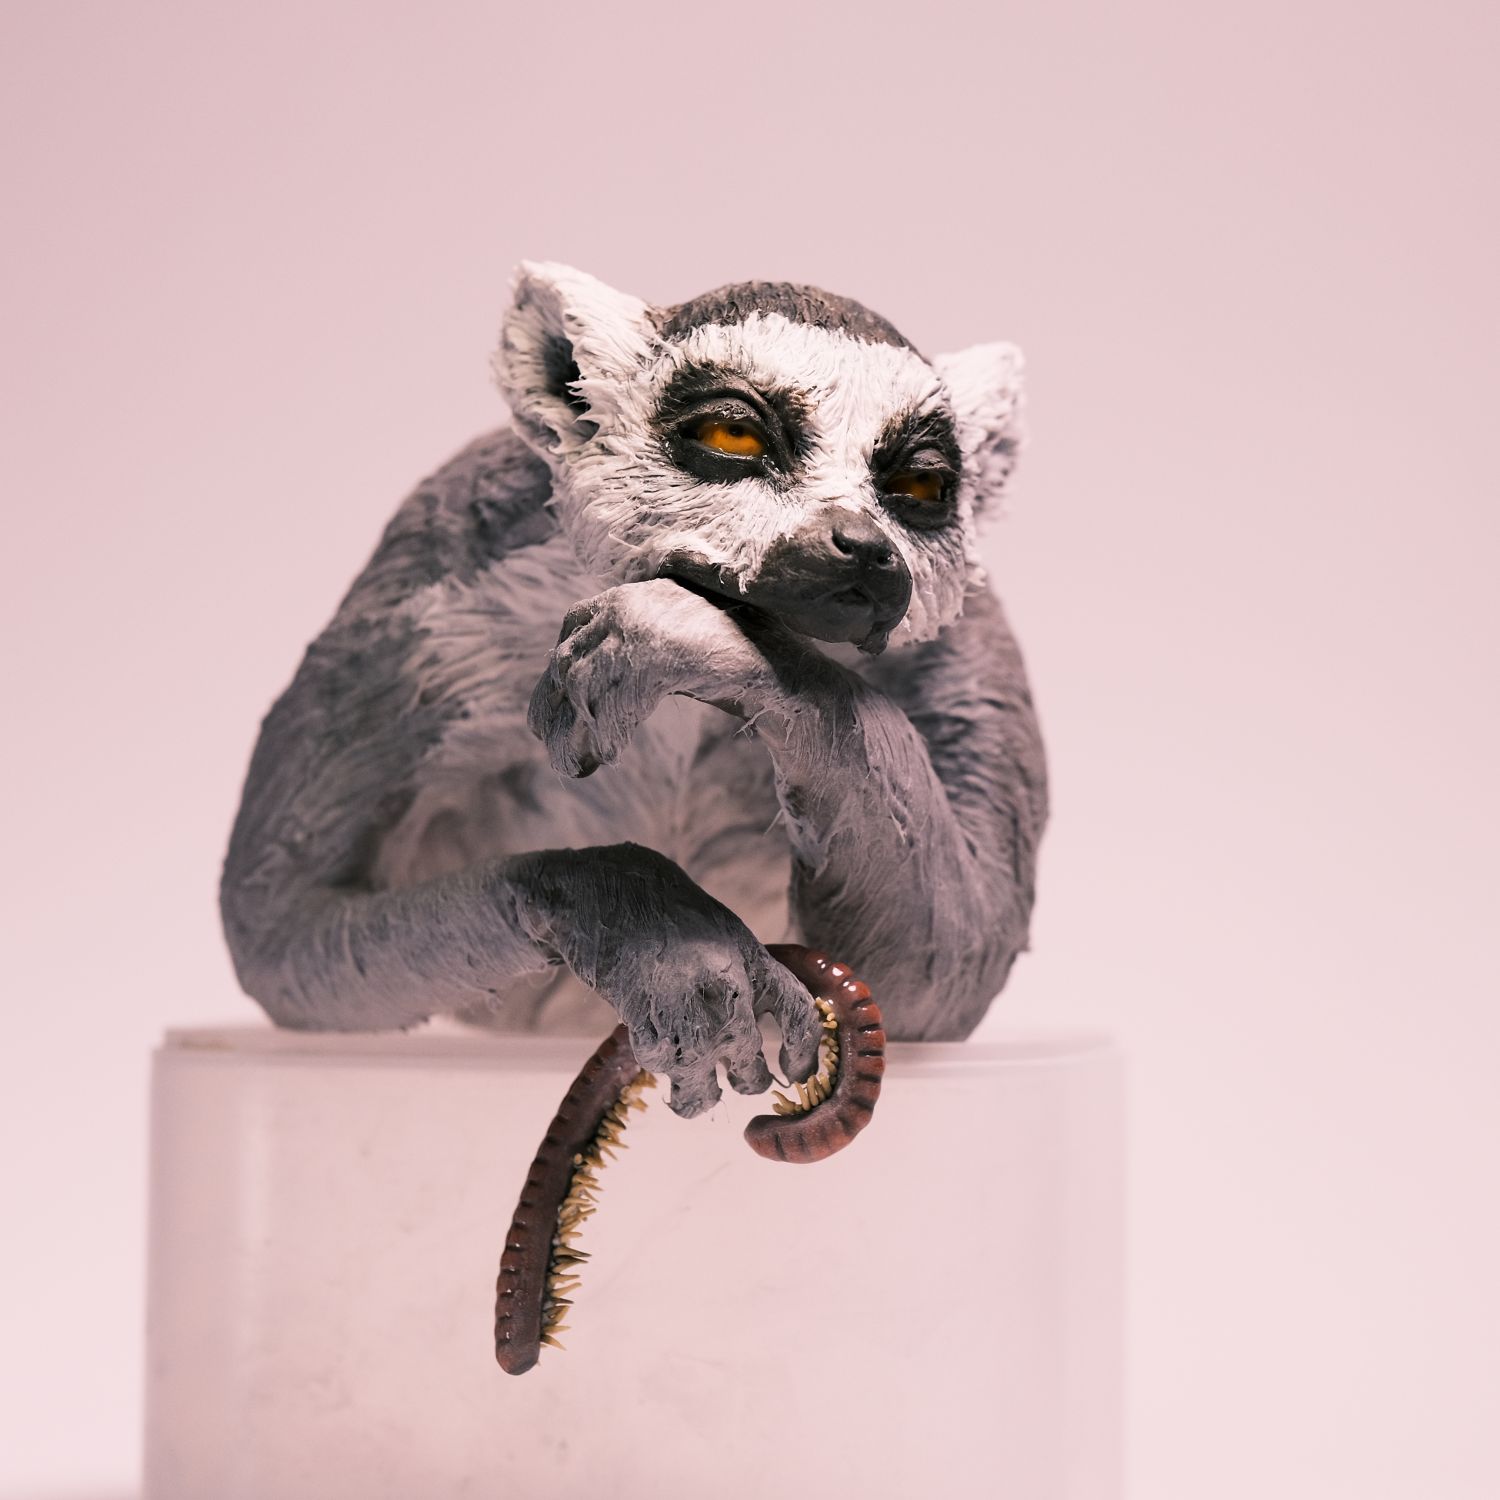 Peidi Wang: Lemur with a worm – Not For Sale Product Image 1 of 3